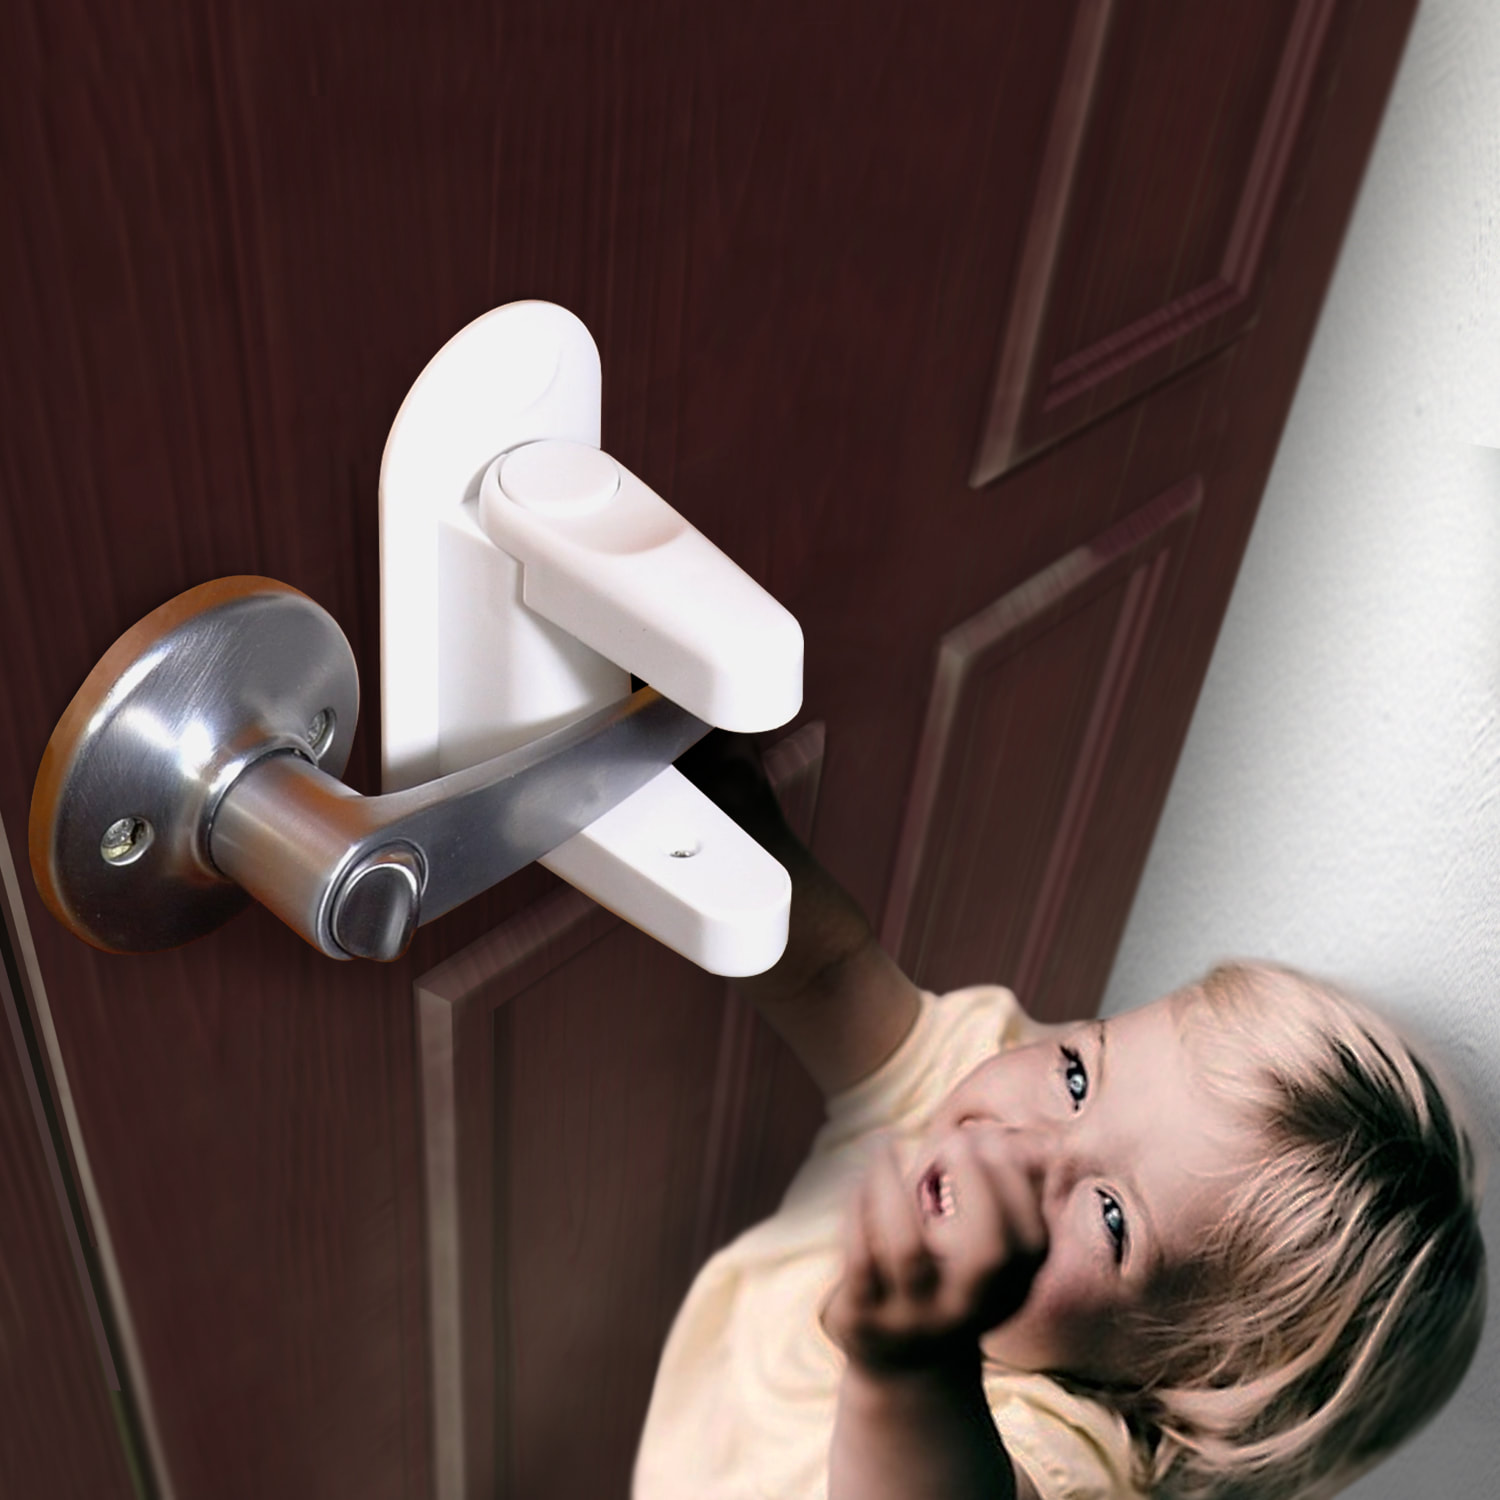 Door Lever Lock for Child Safety